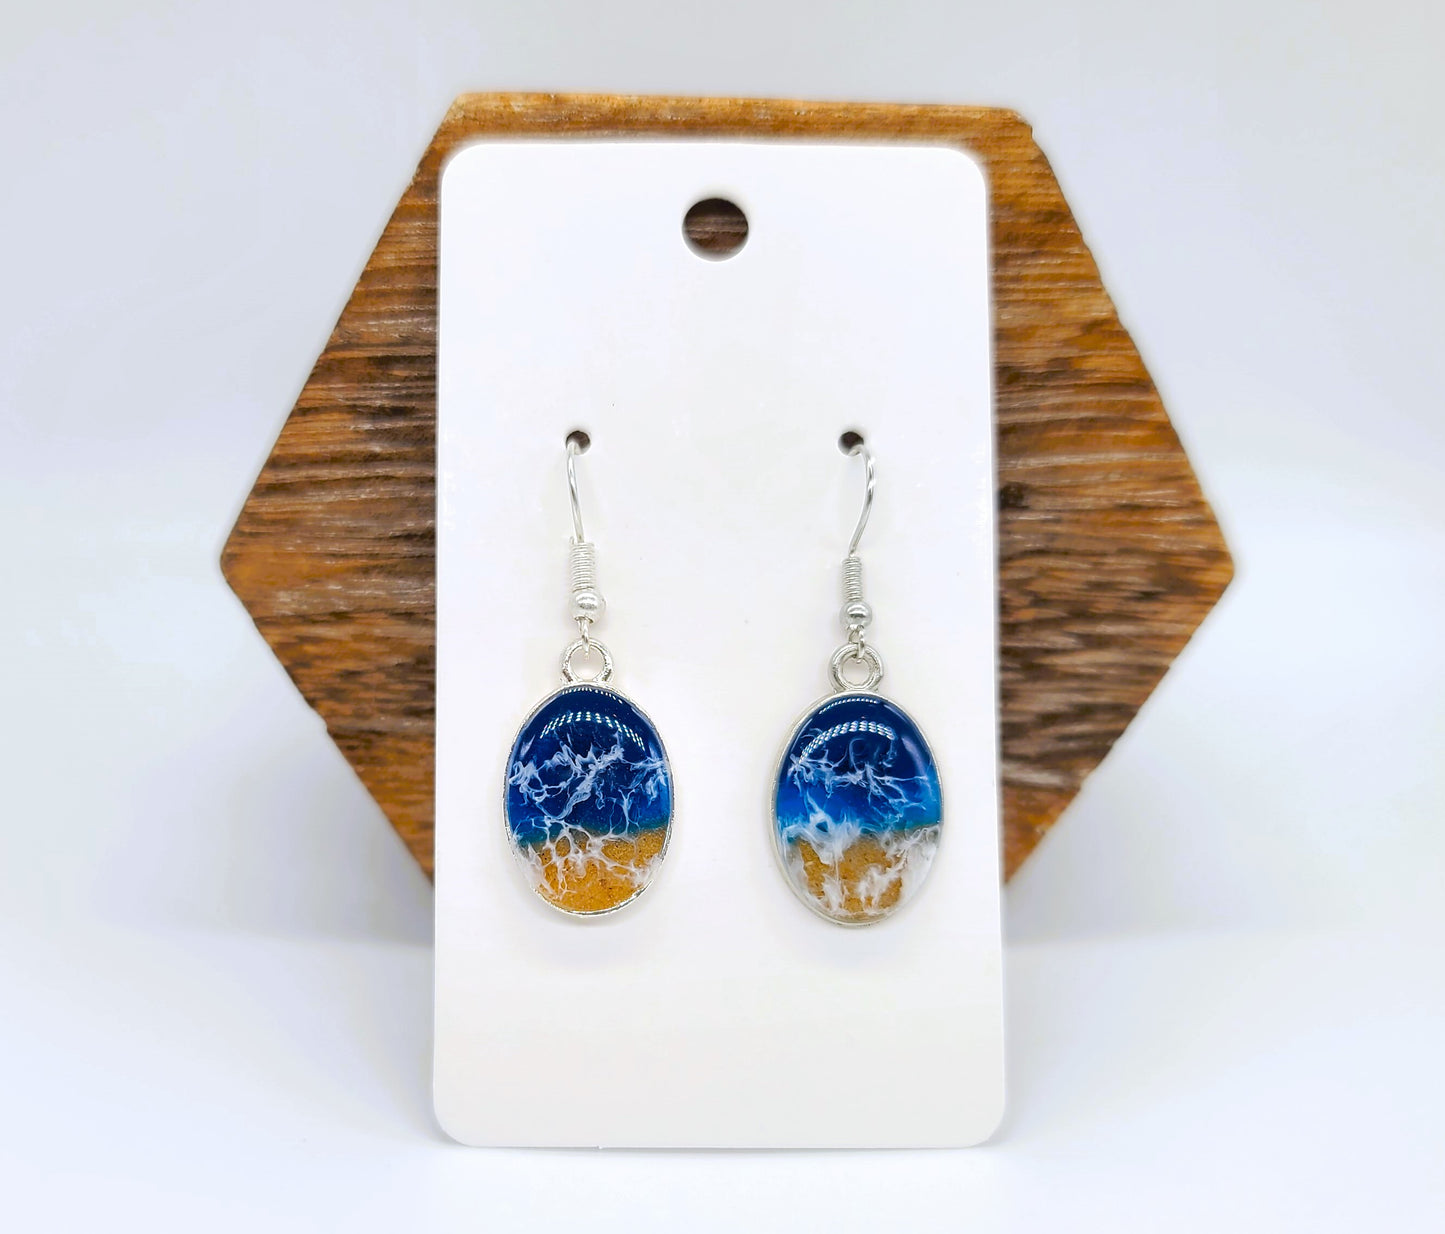 Small Oval Resin Seascape Necklace & Earring Set